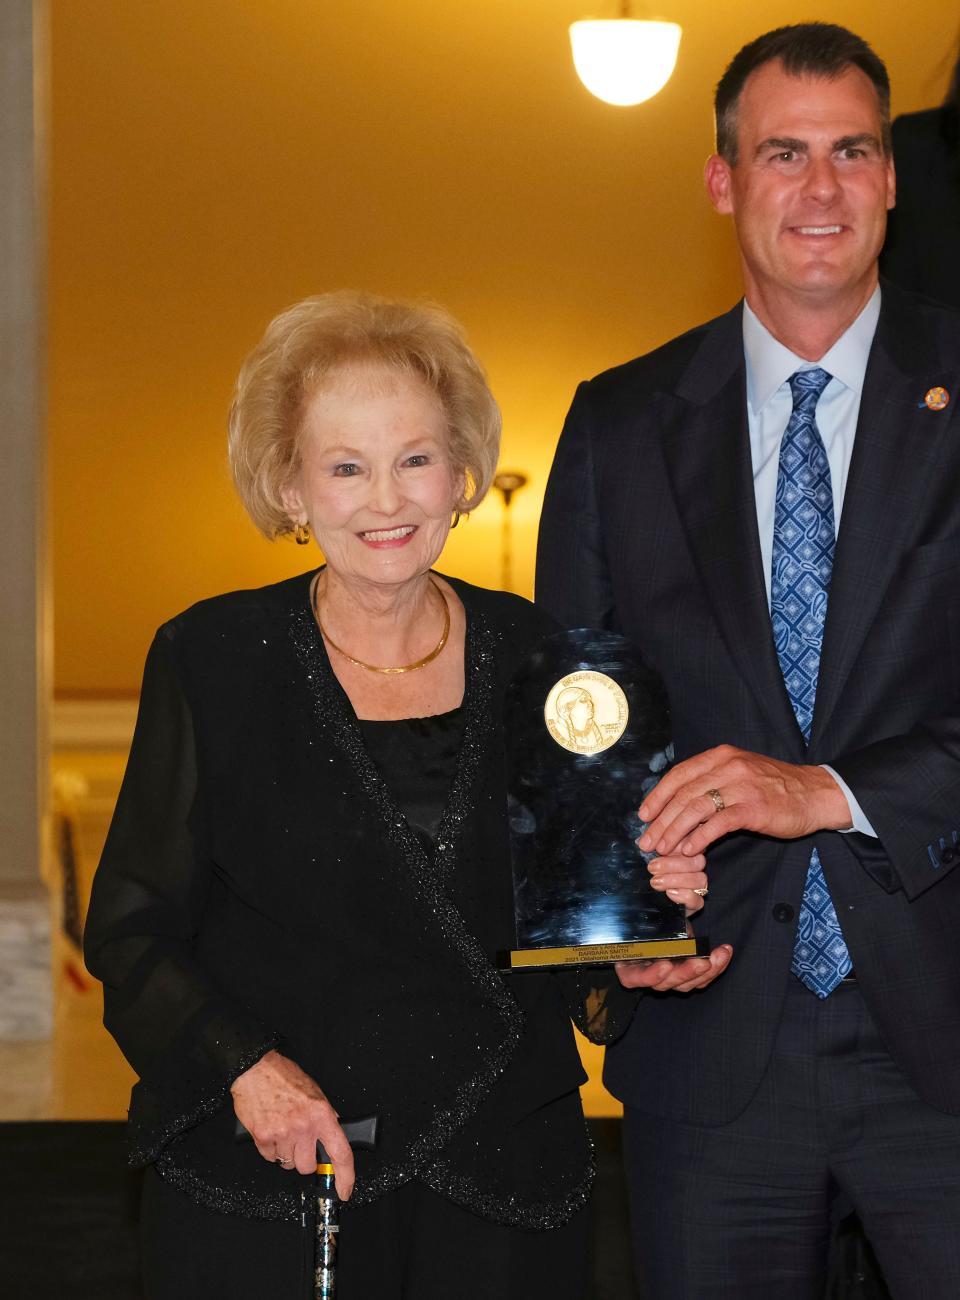 Barbara Smith receives the Governor's Arts Award from Gov. Kevin Stitt at the Governor's Arts Awards for Excellence in the Arts at the Capitol, Tuesday, November 9, 2021.